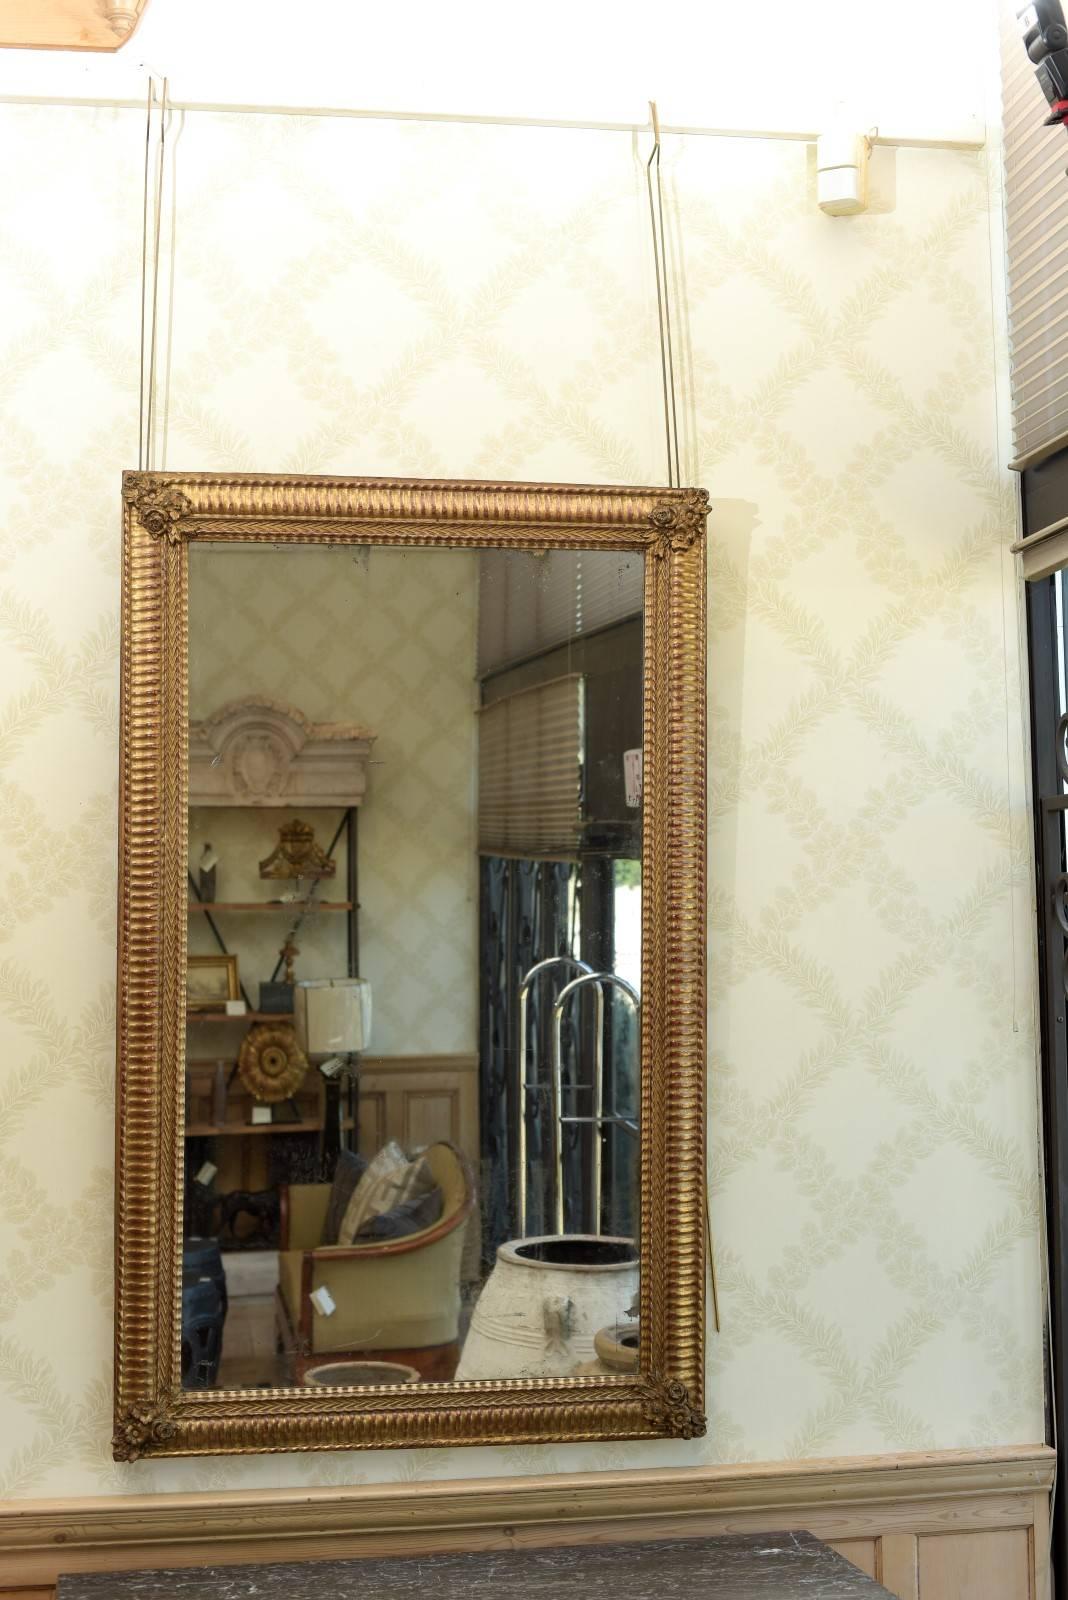 19th century Restauration period gilt mirror, circa 1830.
This is a magnificent mirror from the earlier part of the 19th century with a nicely detailed and carved wood frame.  Although the frame is overall straight lined there is a trio of flowers